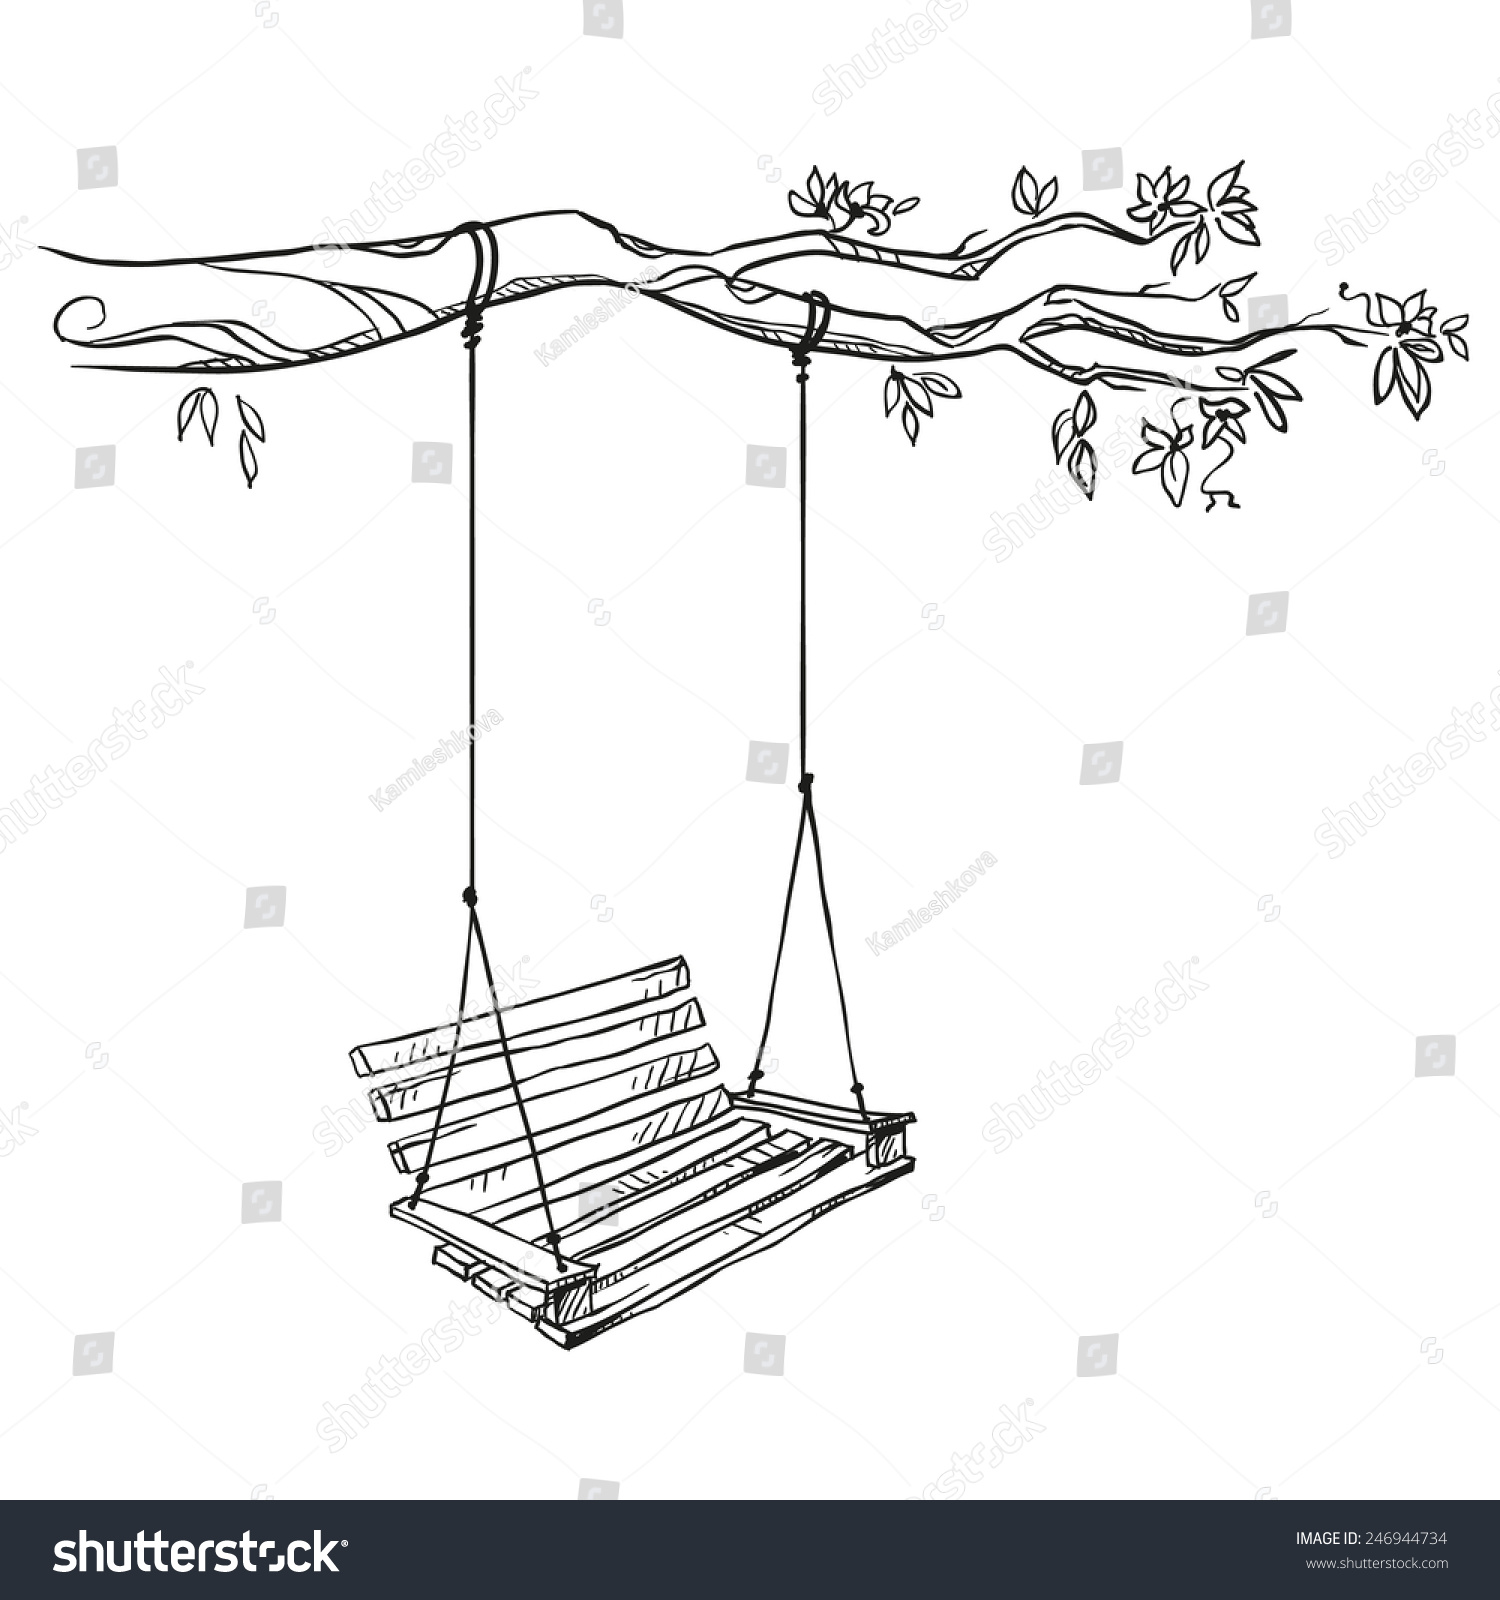 Tree With A Swing. Vector Illustration. - 246944734 : Shutterstock